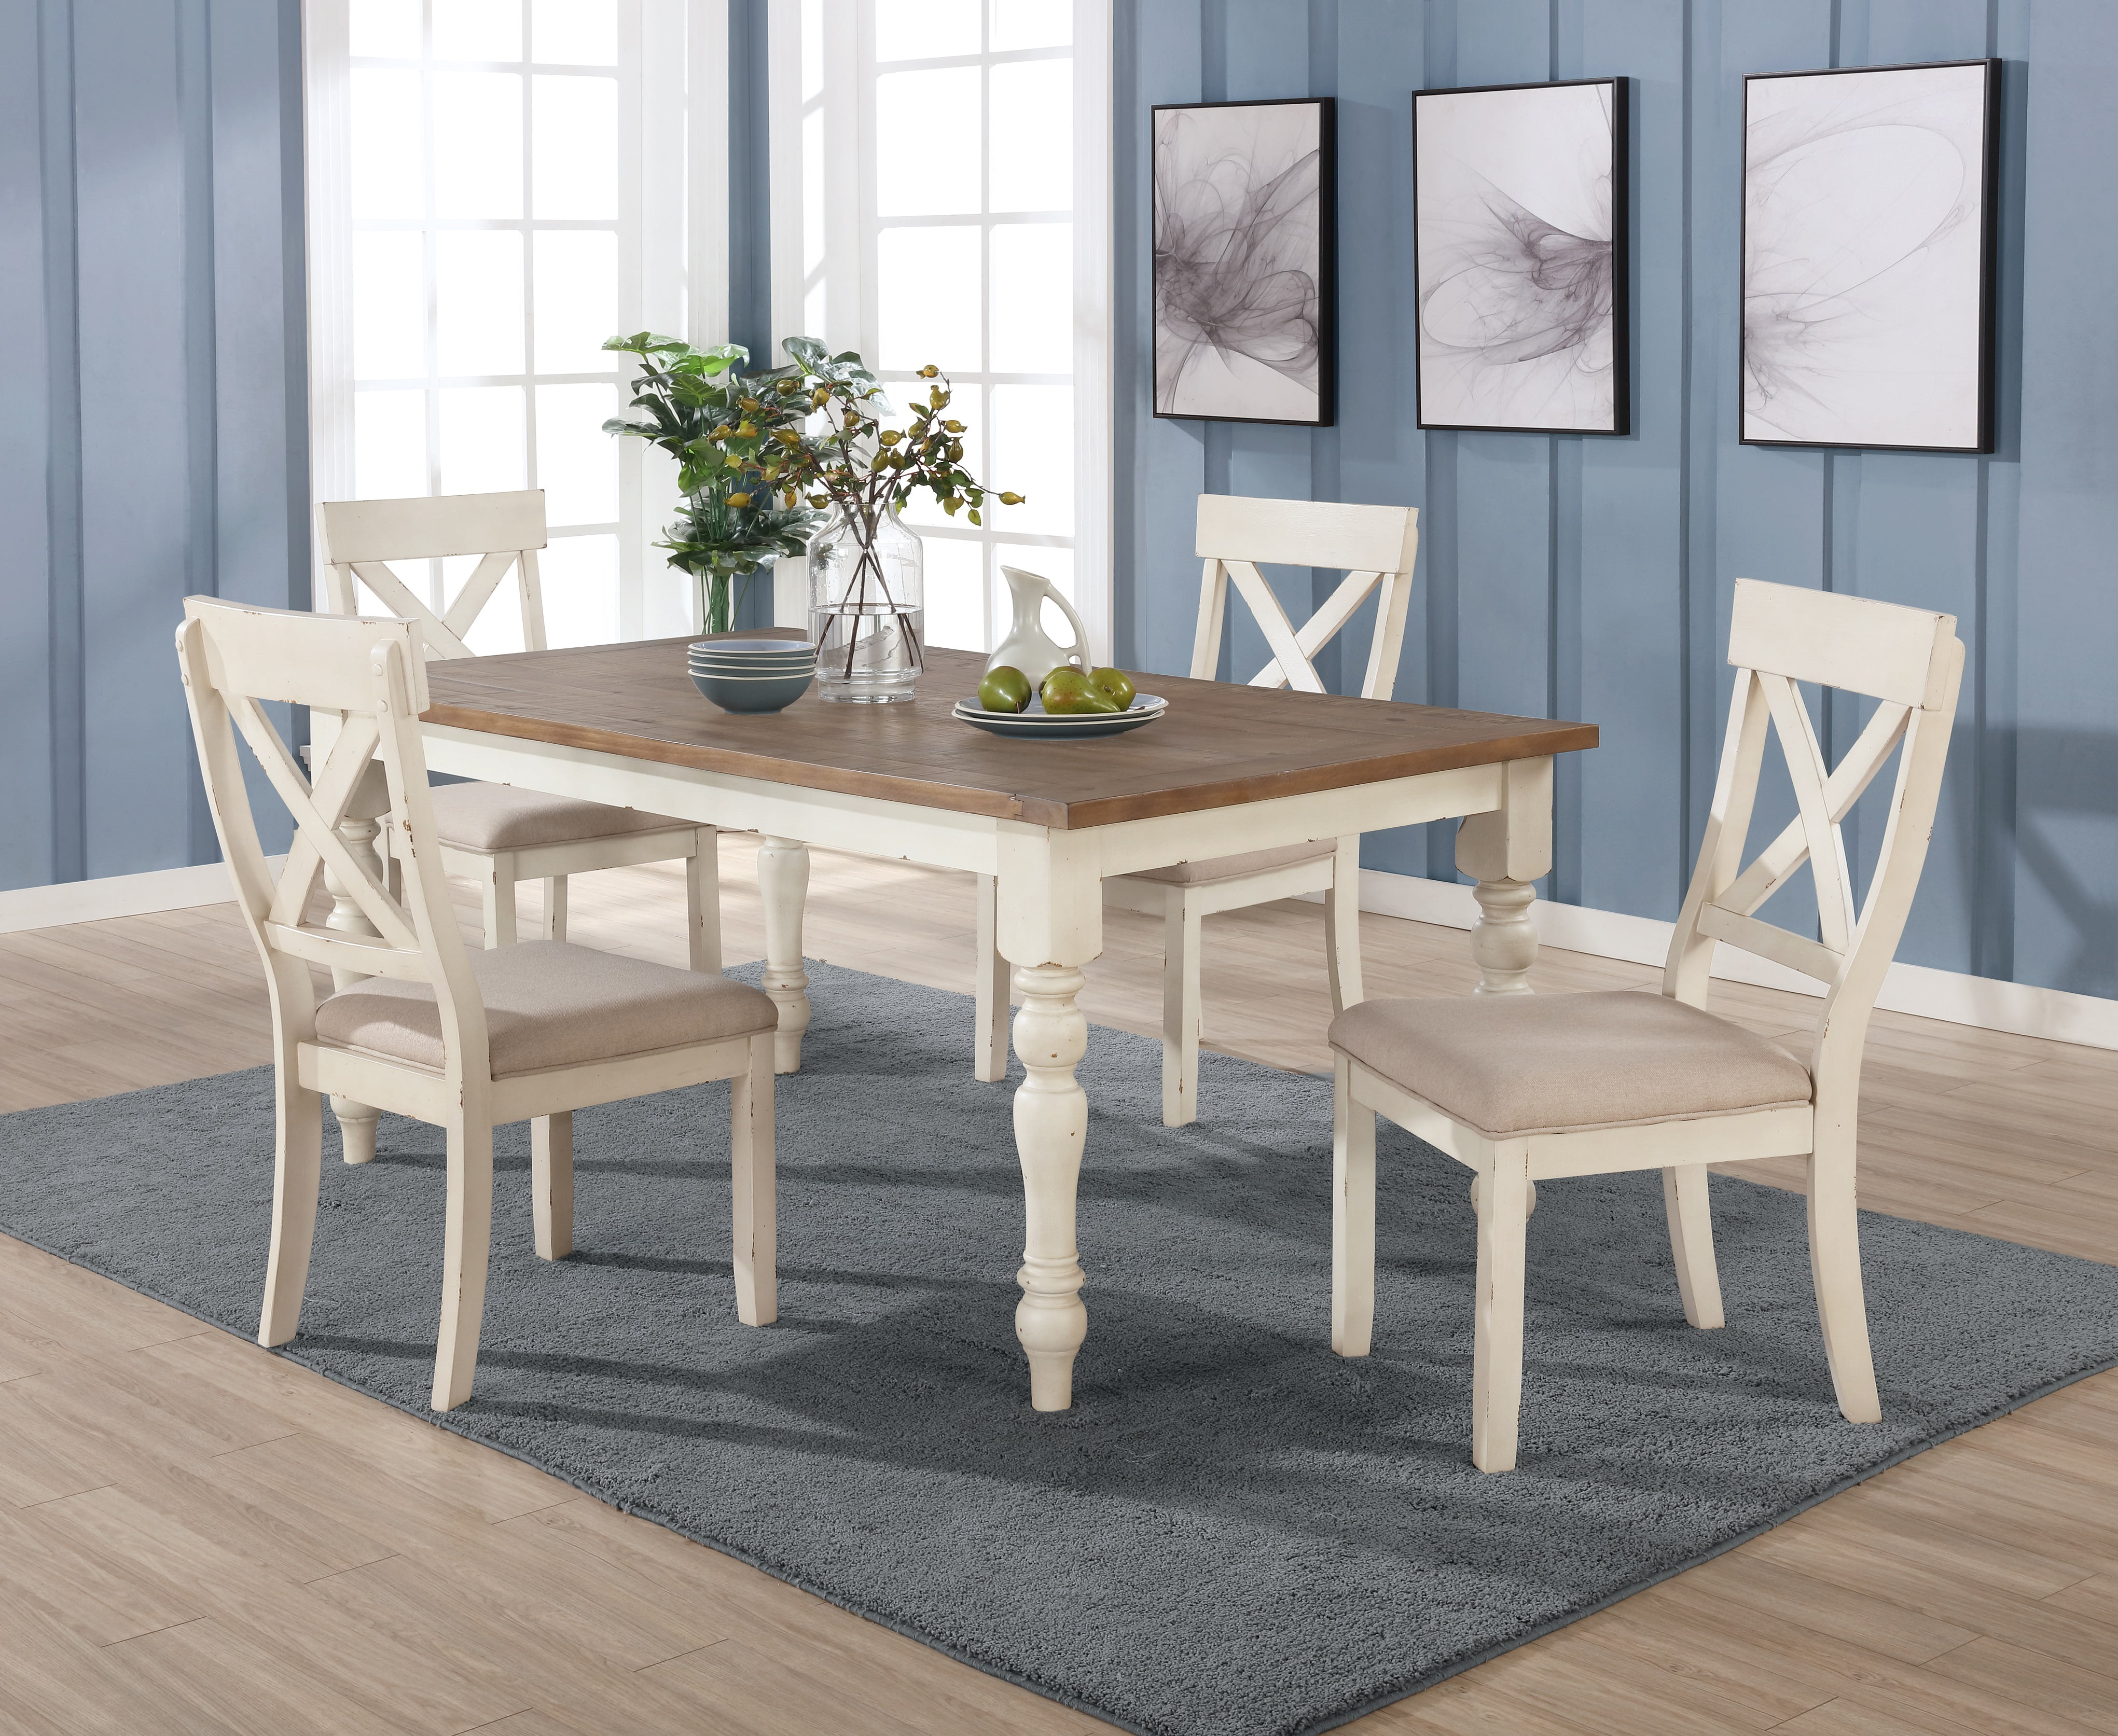 Roundhill Furniture Prato 5piece Dining Table Set With Cross Back